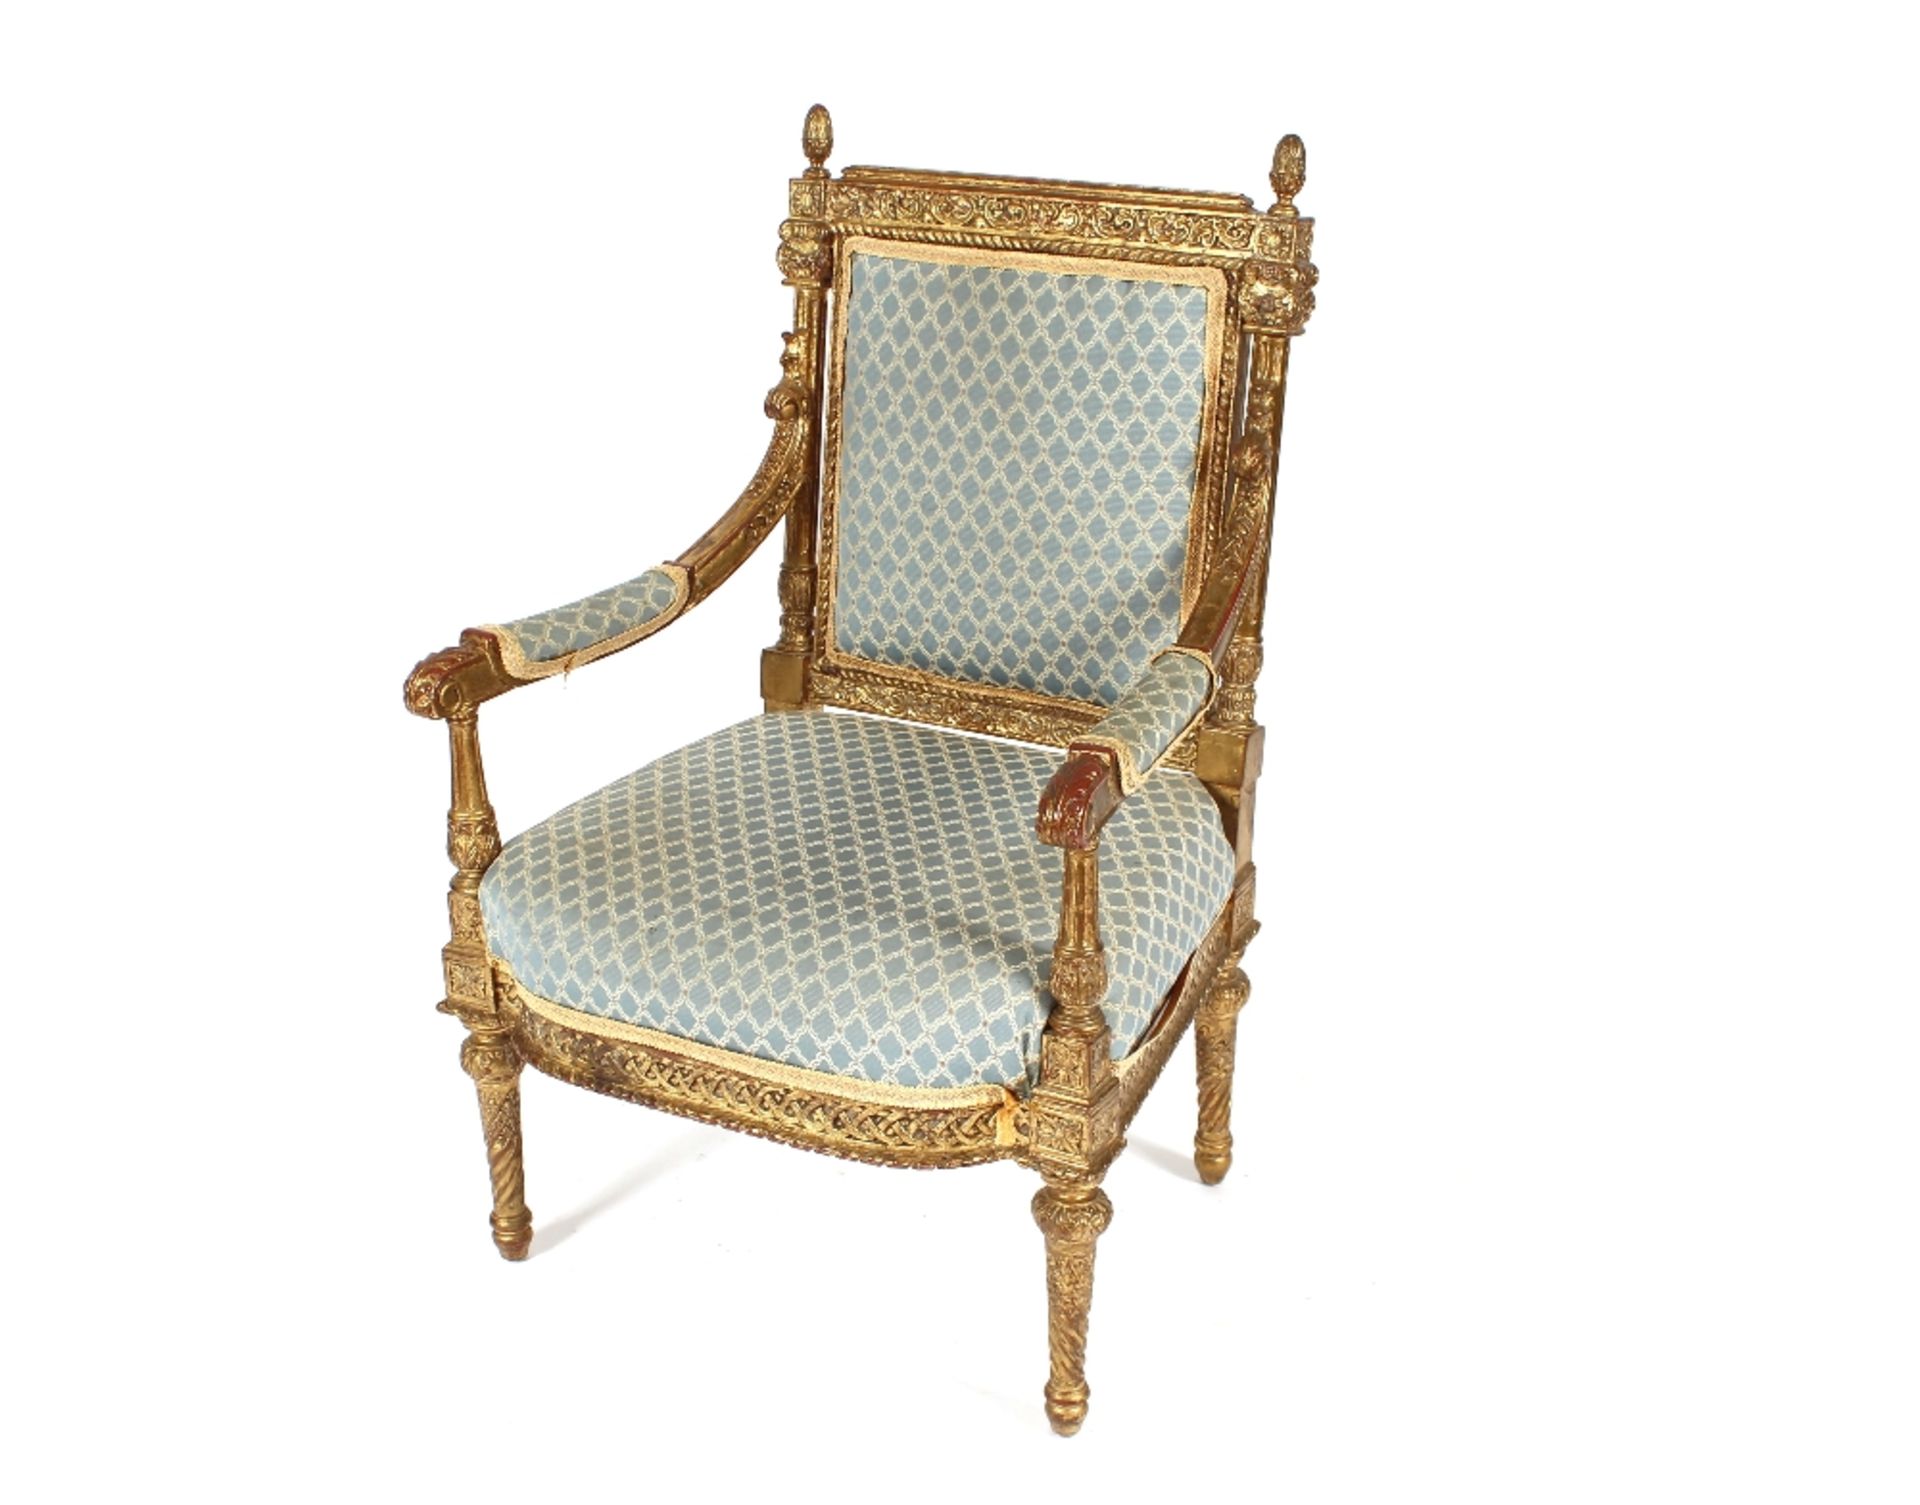 A pair of 19th Century French gilt wood armchairs, the back surmounted by pineapple finials above